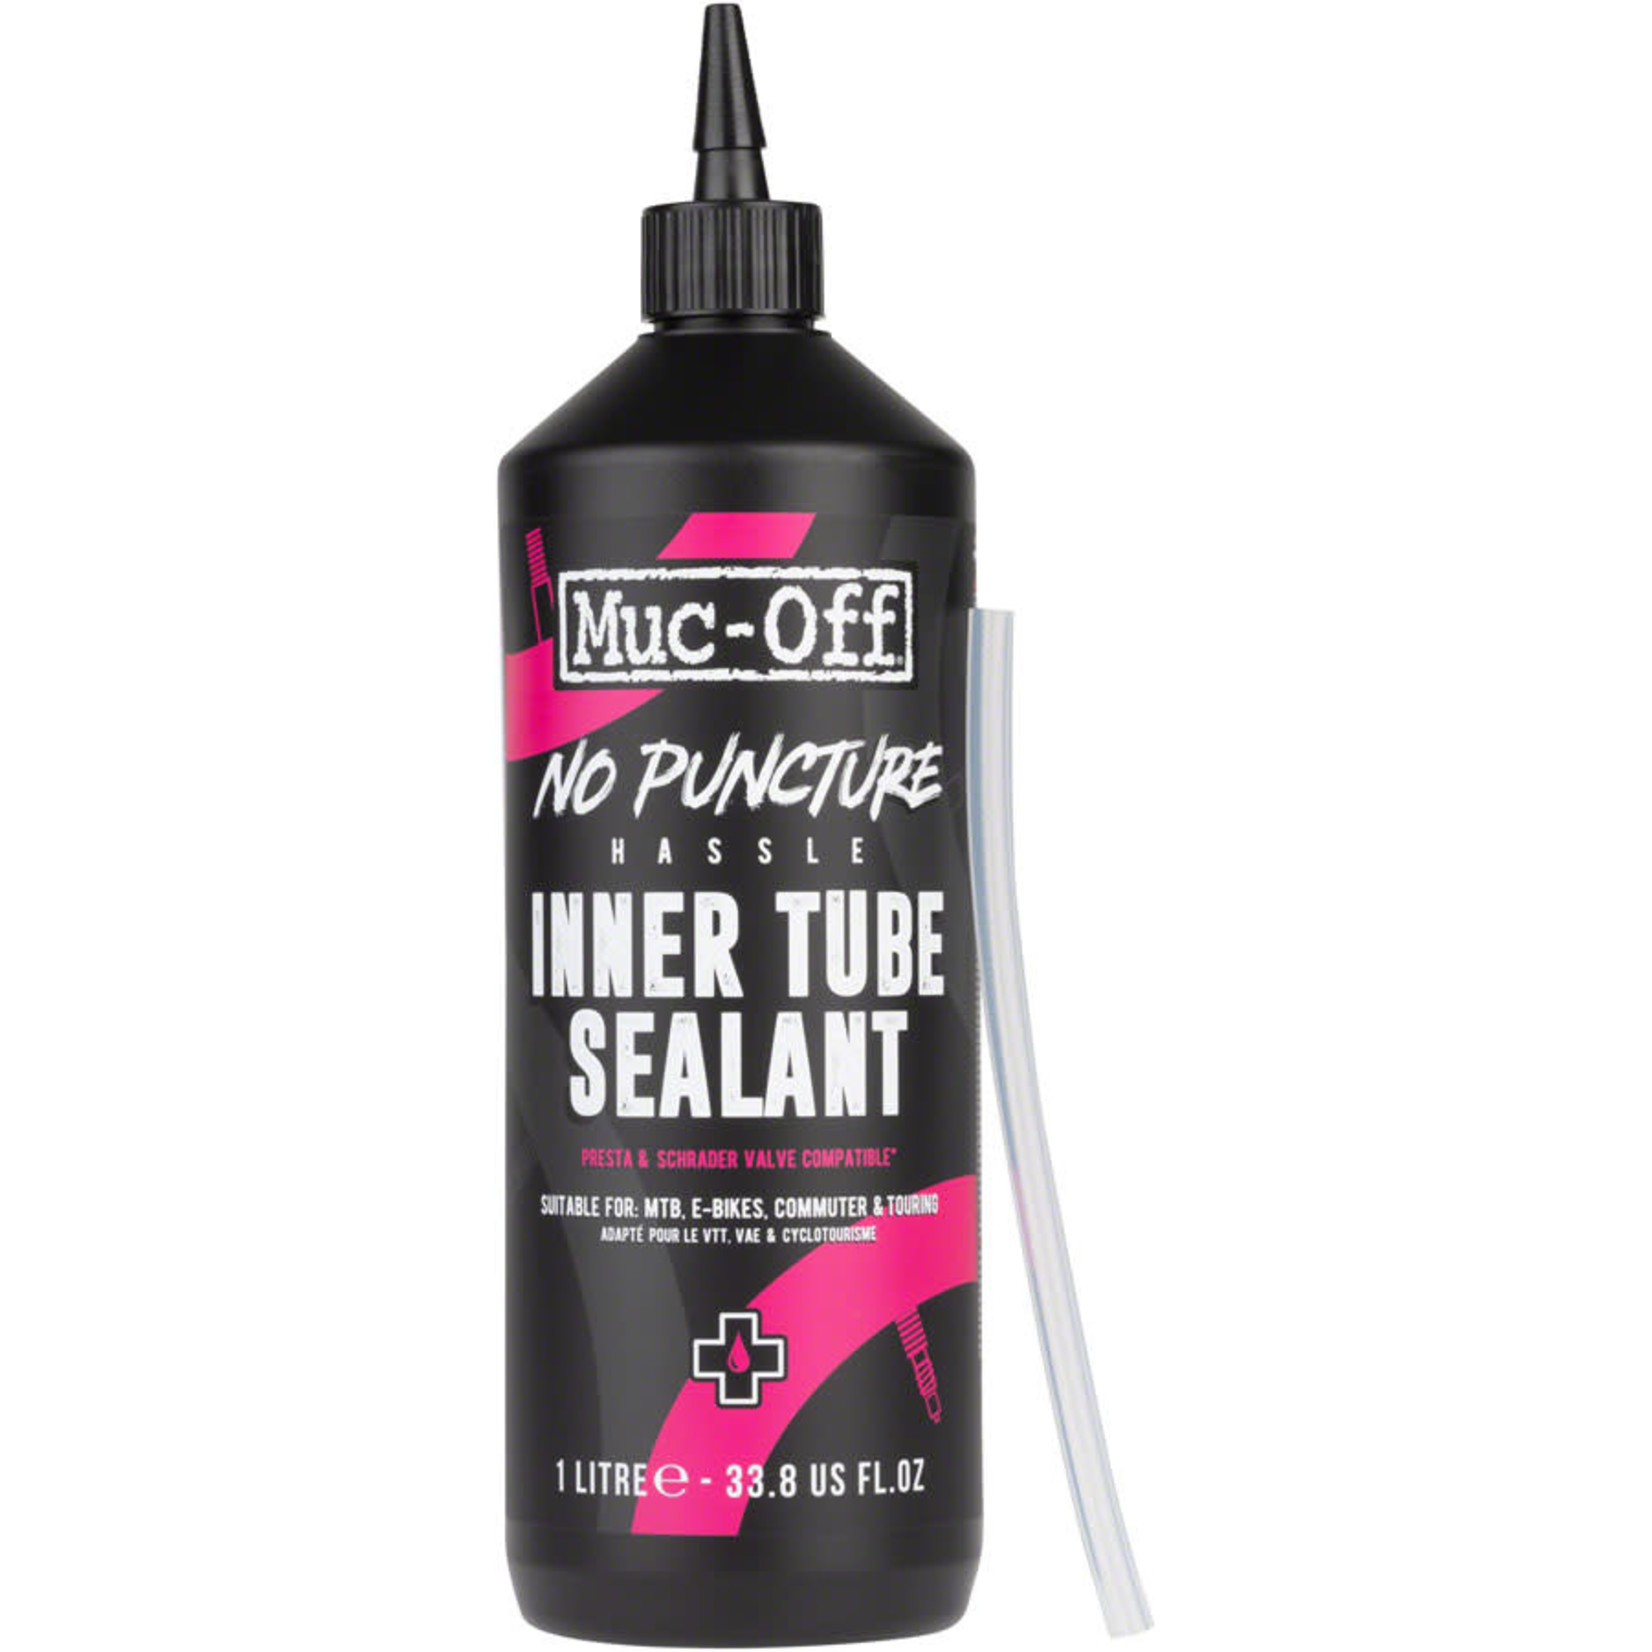 Muc-Off No Puncture Hassle Inner Tube Sealant - 1L